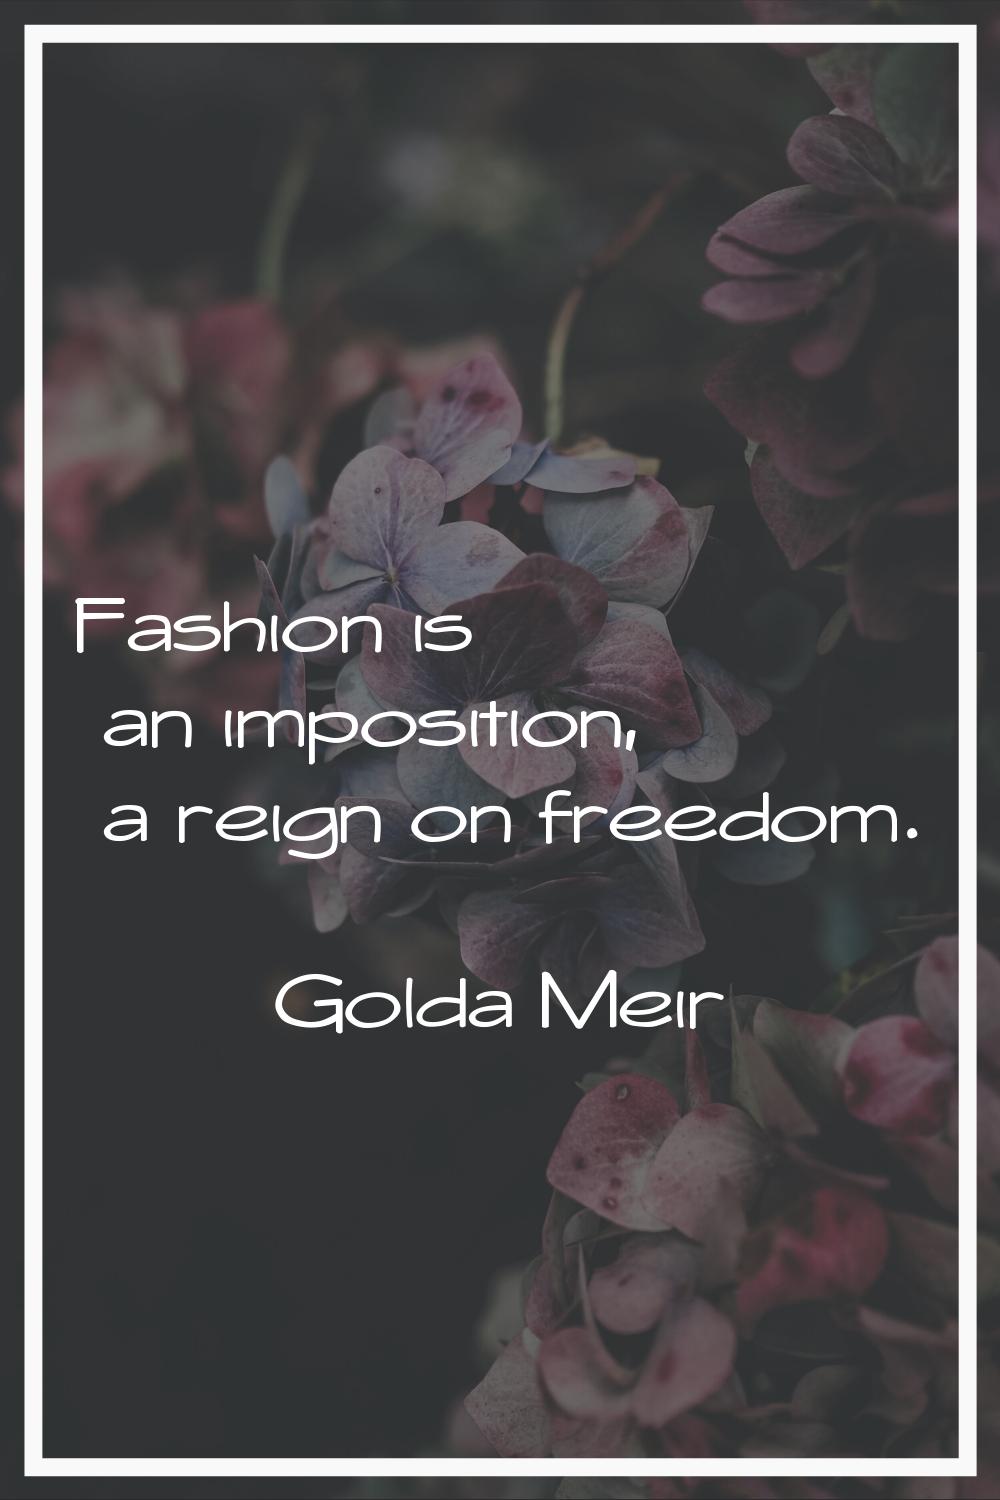 Fashion is an imposition, a reign on freedom.